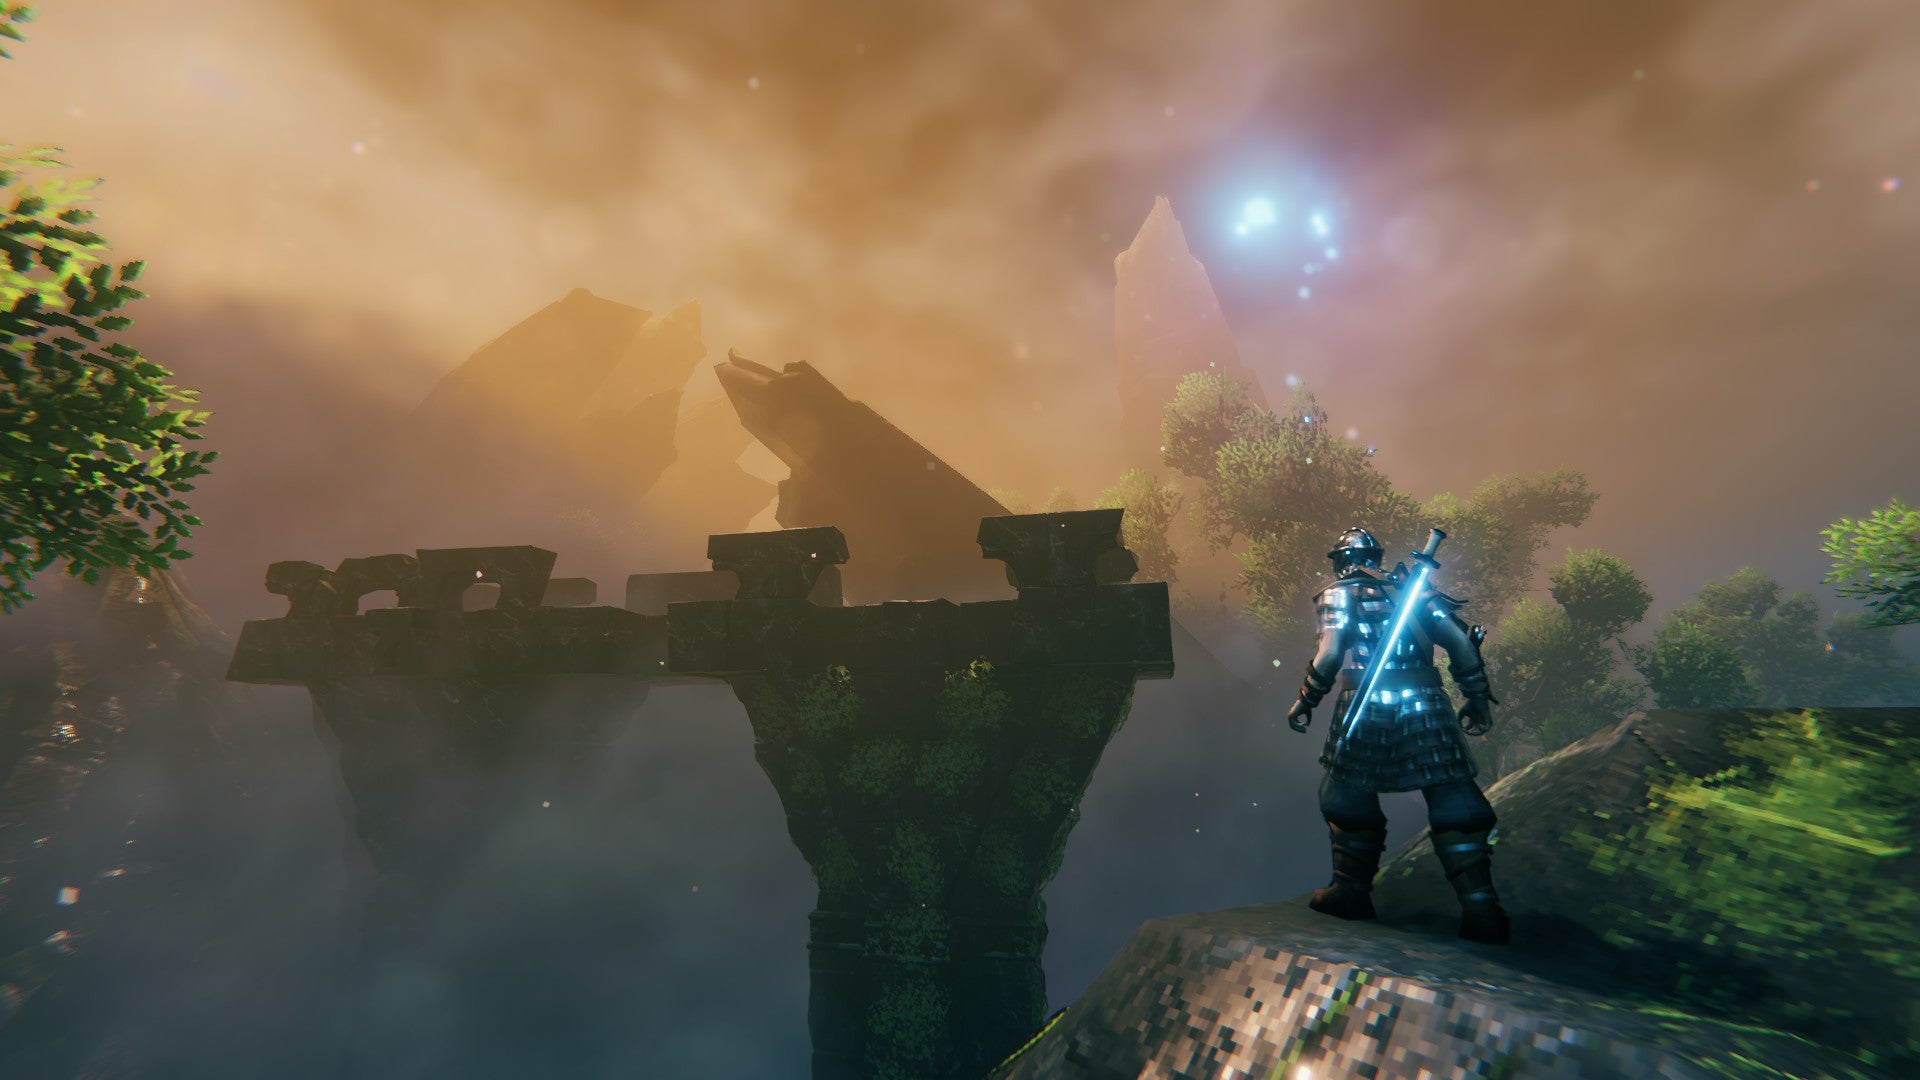 Valheim Mistlands update - a player looks out from a ledge over the misty landscape